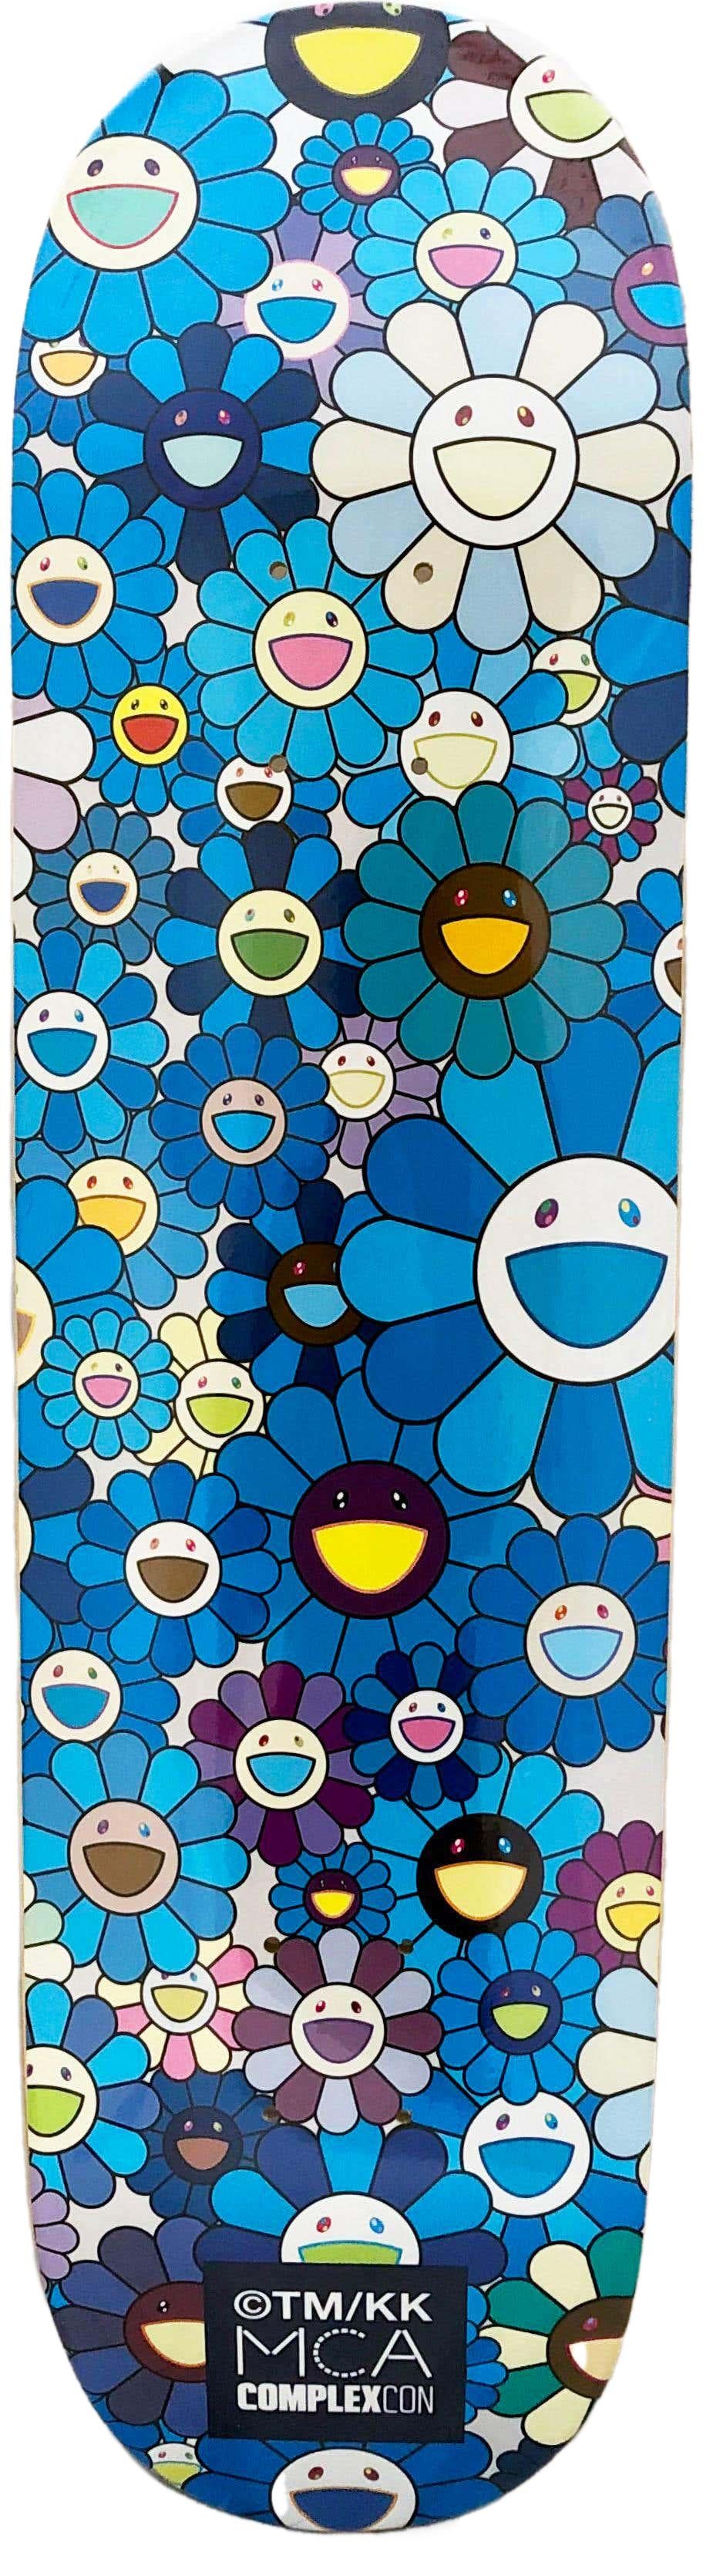 Takashi Murakami Flowers Skateboard Decks: set of 3 works:
Vibrant Takashi Murakami wall art produced as a limited series in conjunction with the 2017 Murakami exhibit: The Octopus Eats Its Own Leg, MCA Chicago. A set of 3 individual skateboard